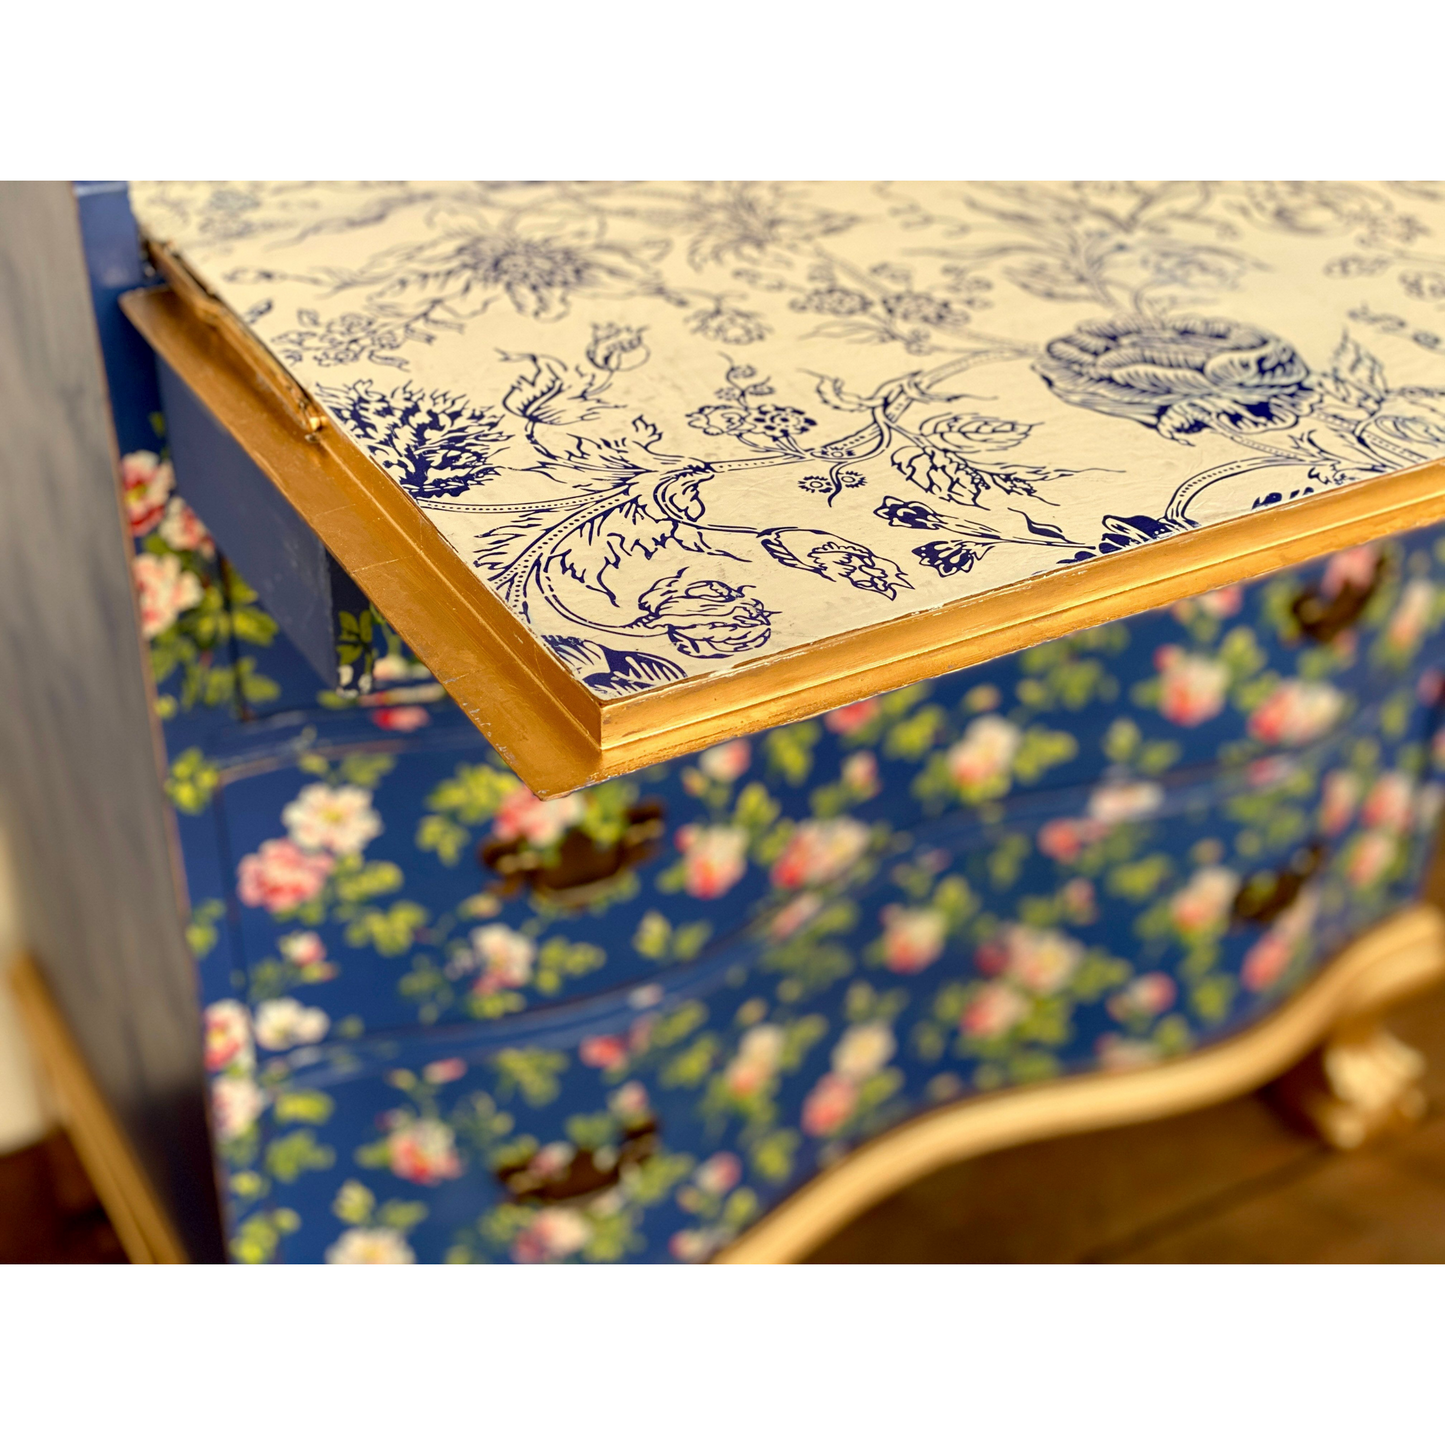 Secretary desk with applied IOD Indigo Floral Paint Inlay by Iron Orchid Designs in navy and white florals. Available at Milton's Daughter.